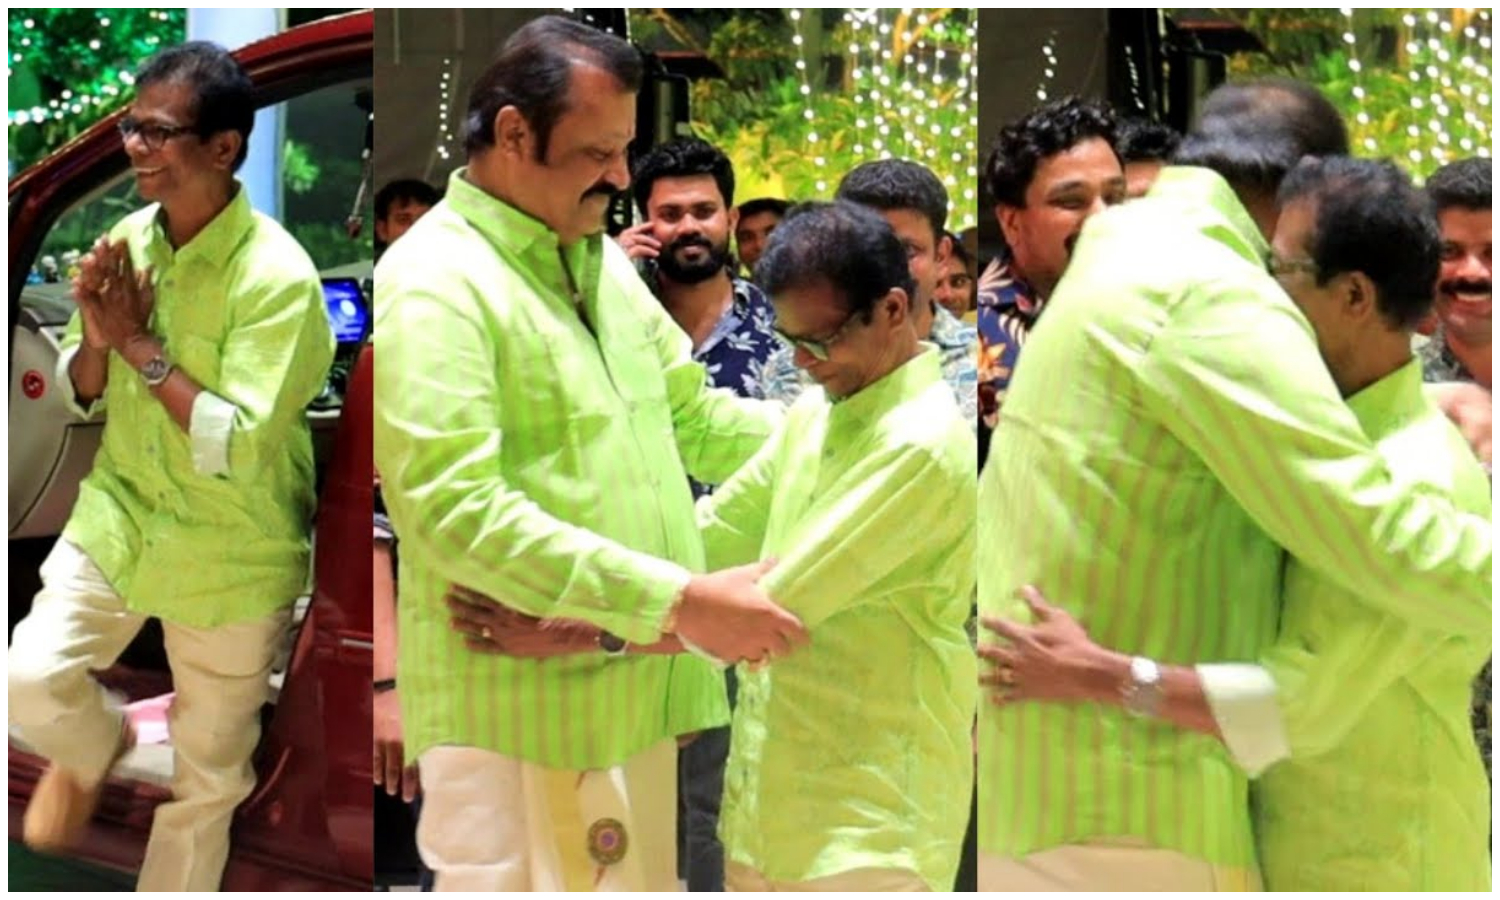 Indrans And Suresh Gopi In Same Color Shirt